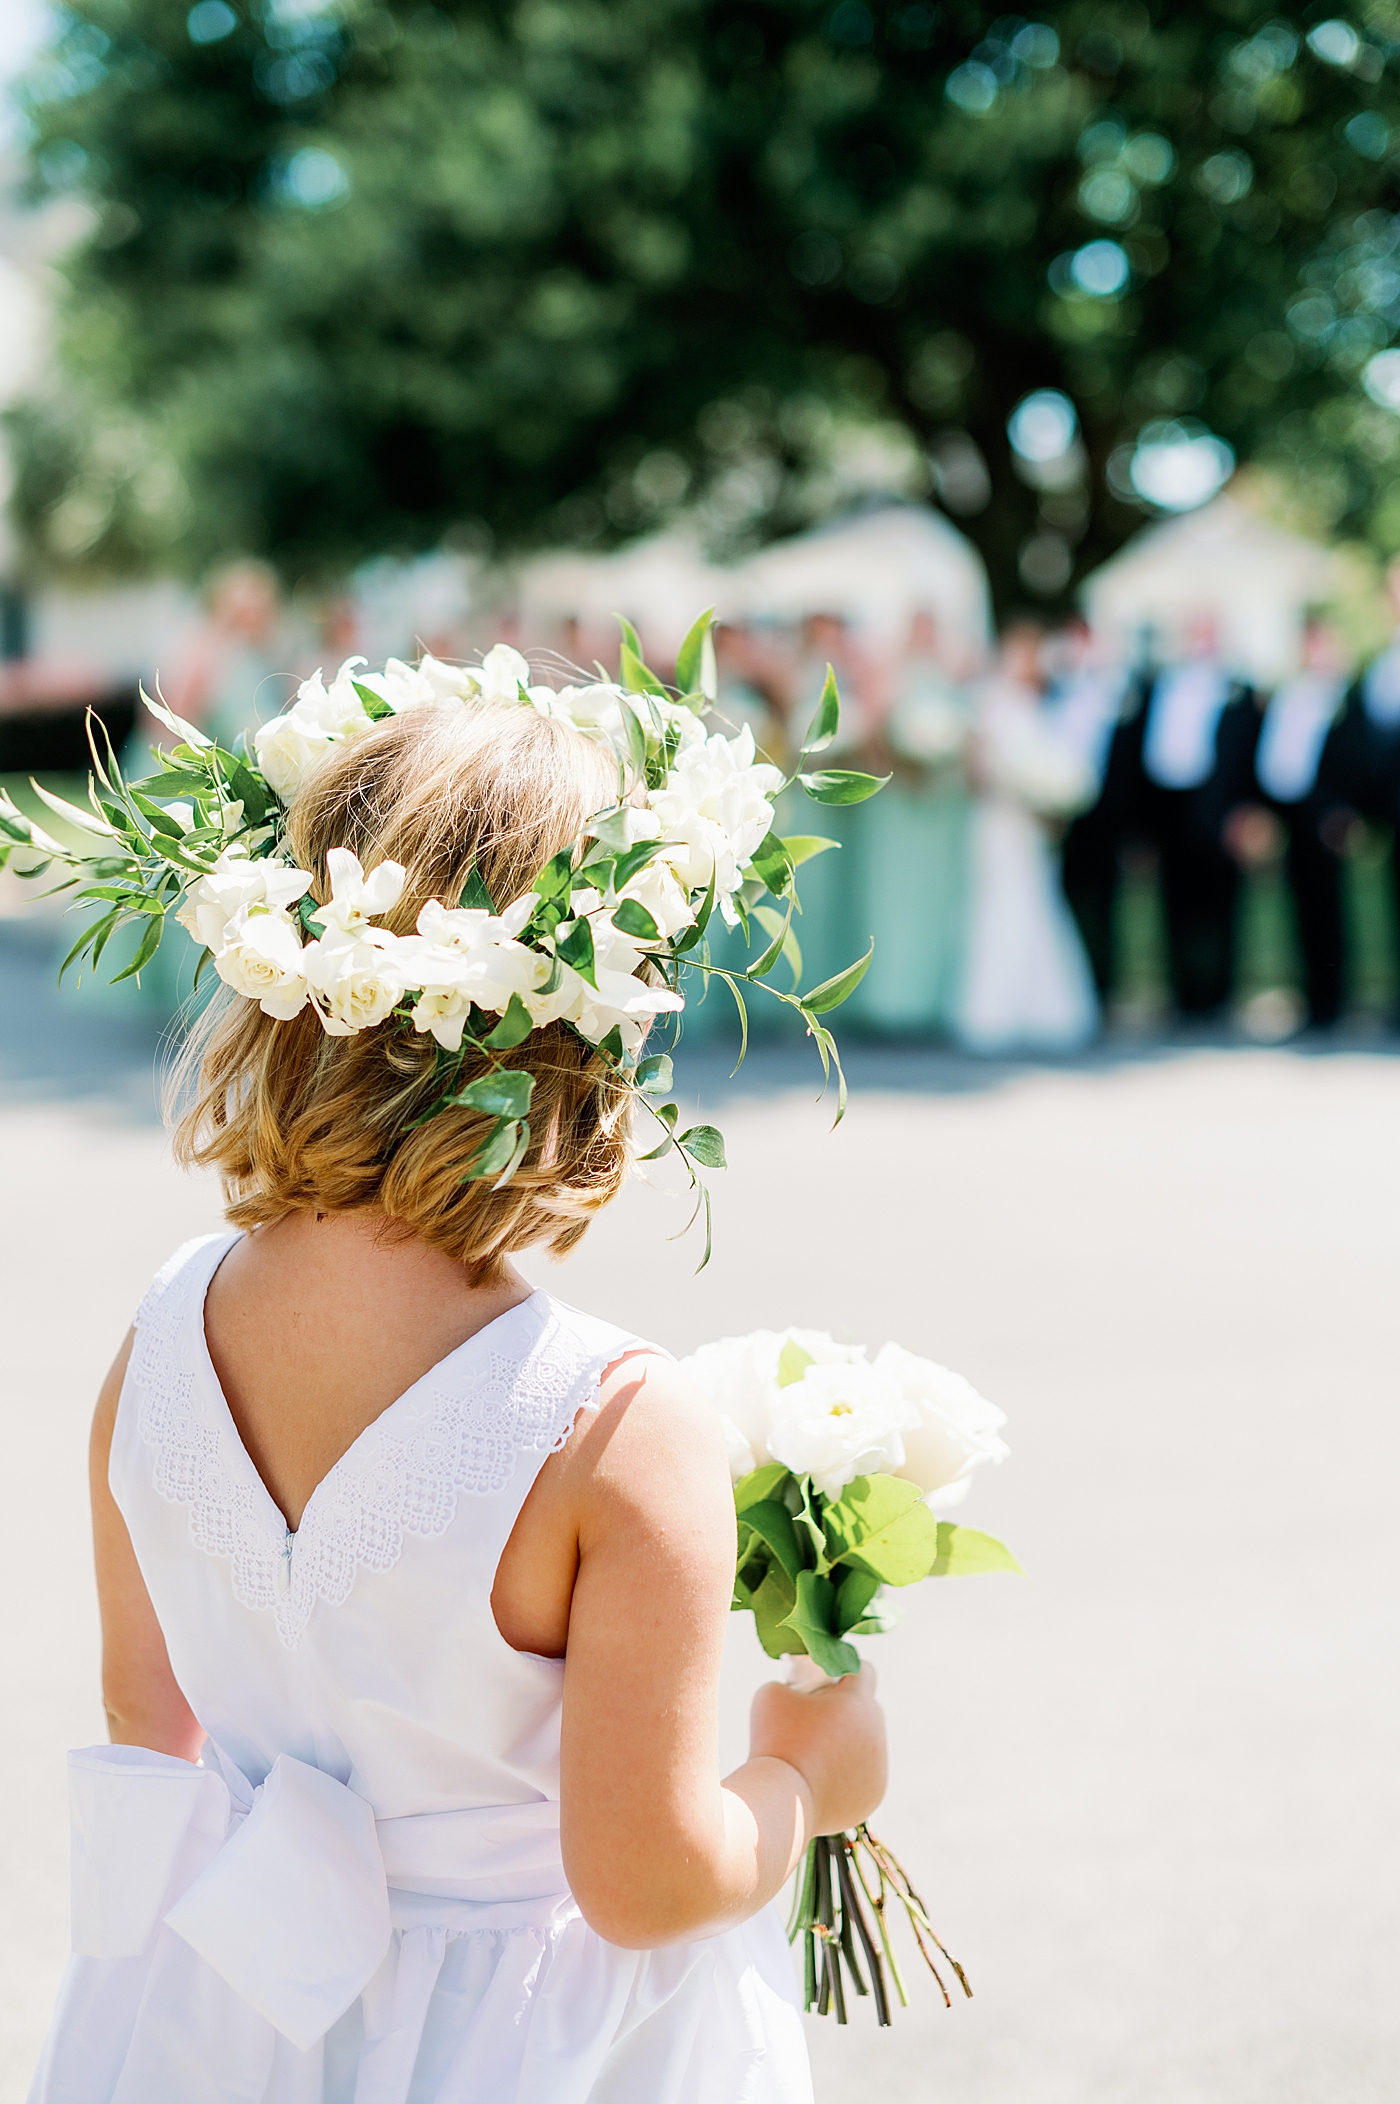 Flower girl with a flower crown holding a bouquet | Image by Annie Laura Photo